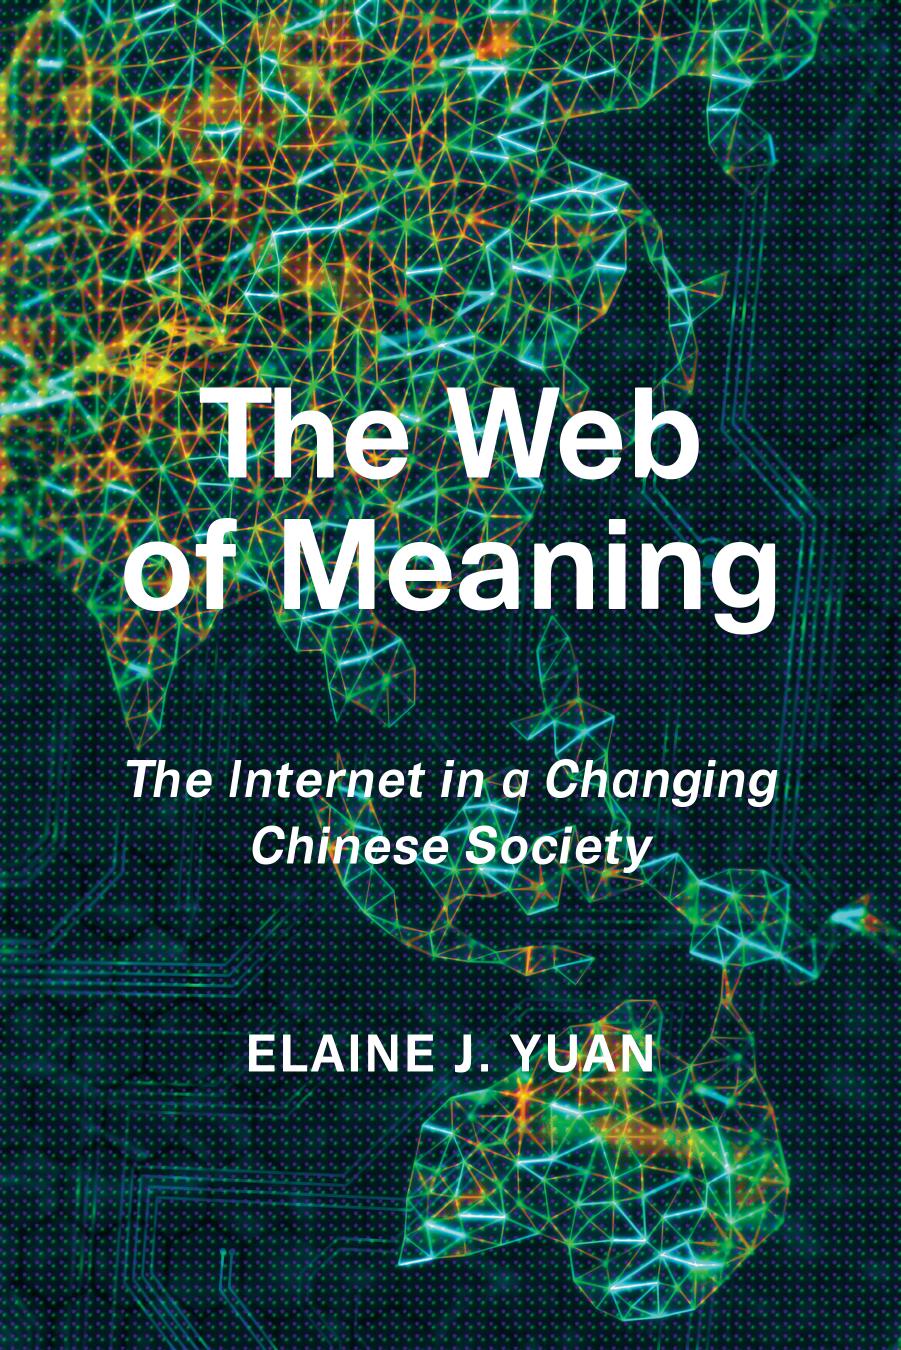 THE WEB OF MEANING: The Internet in a Changing Chinese Society by ELAINE J. YUAN